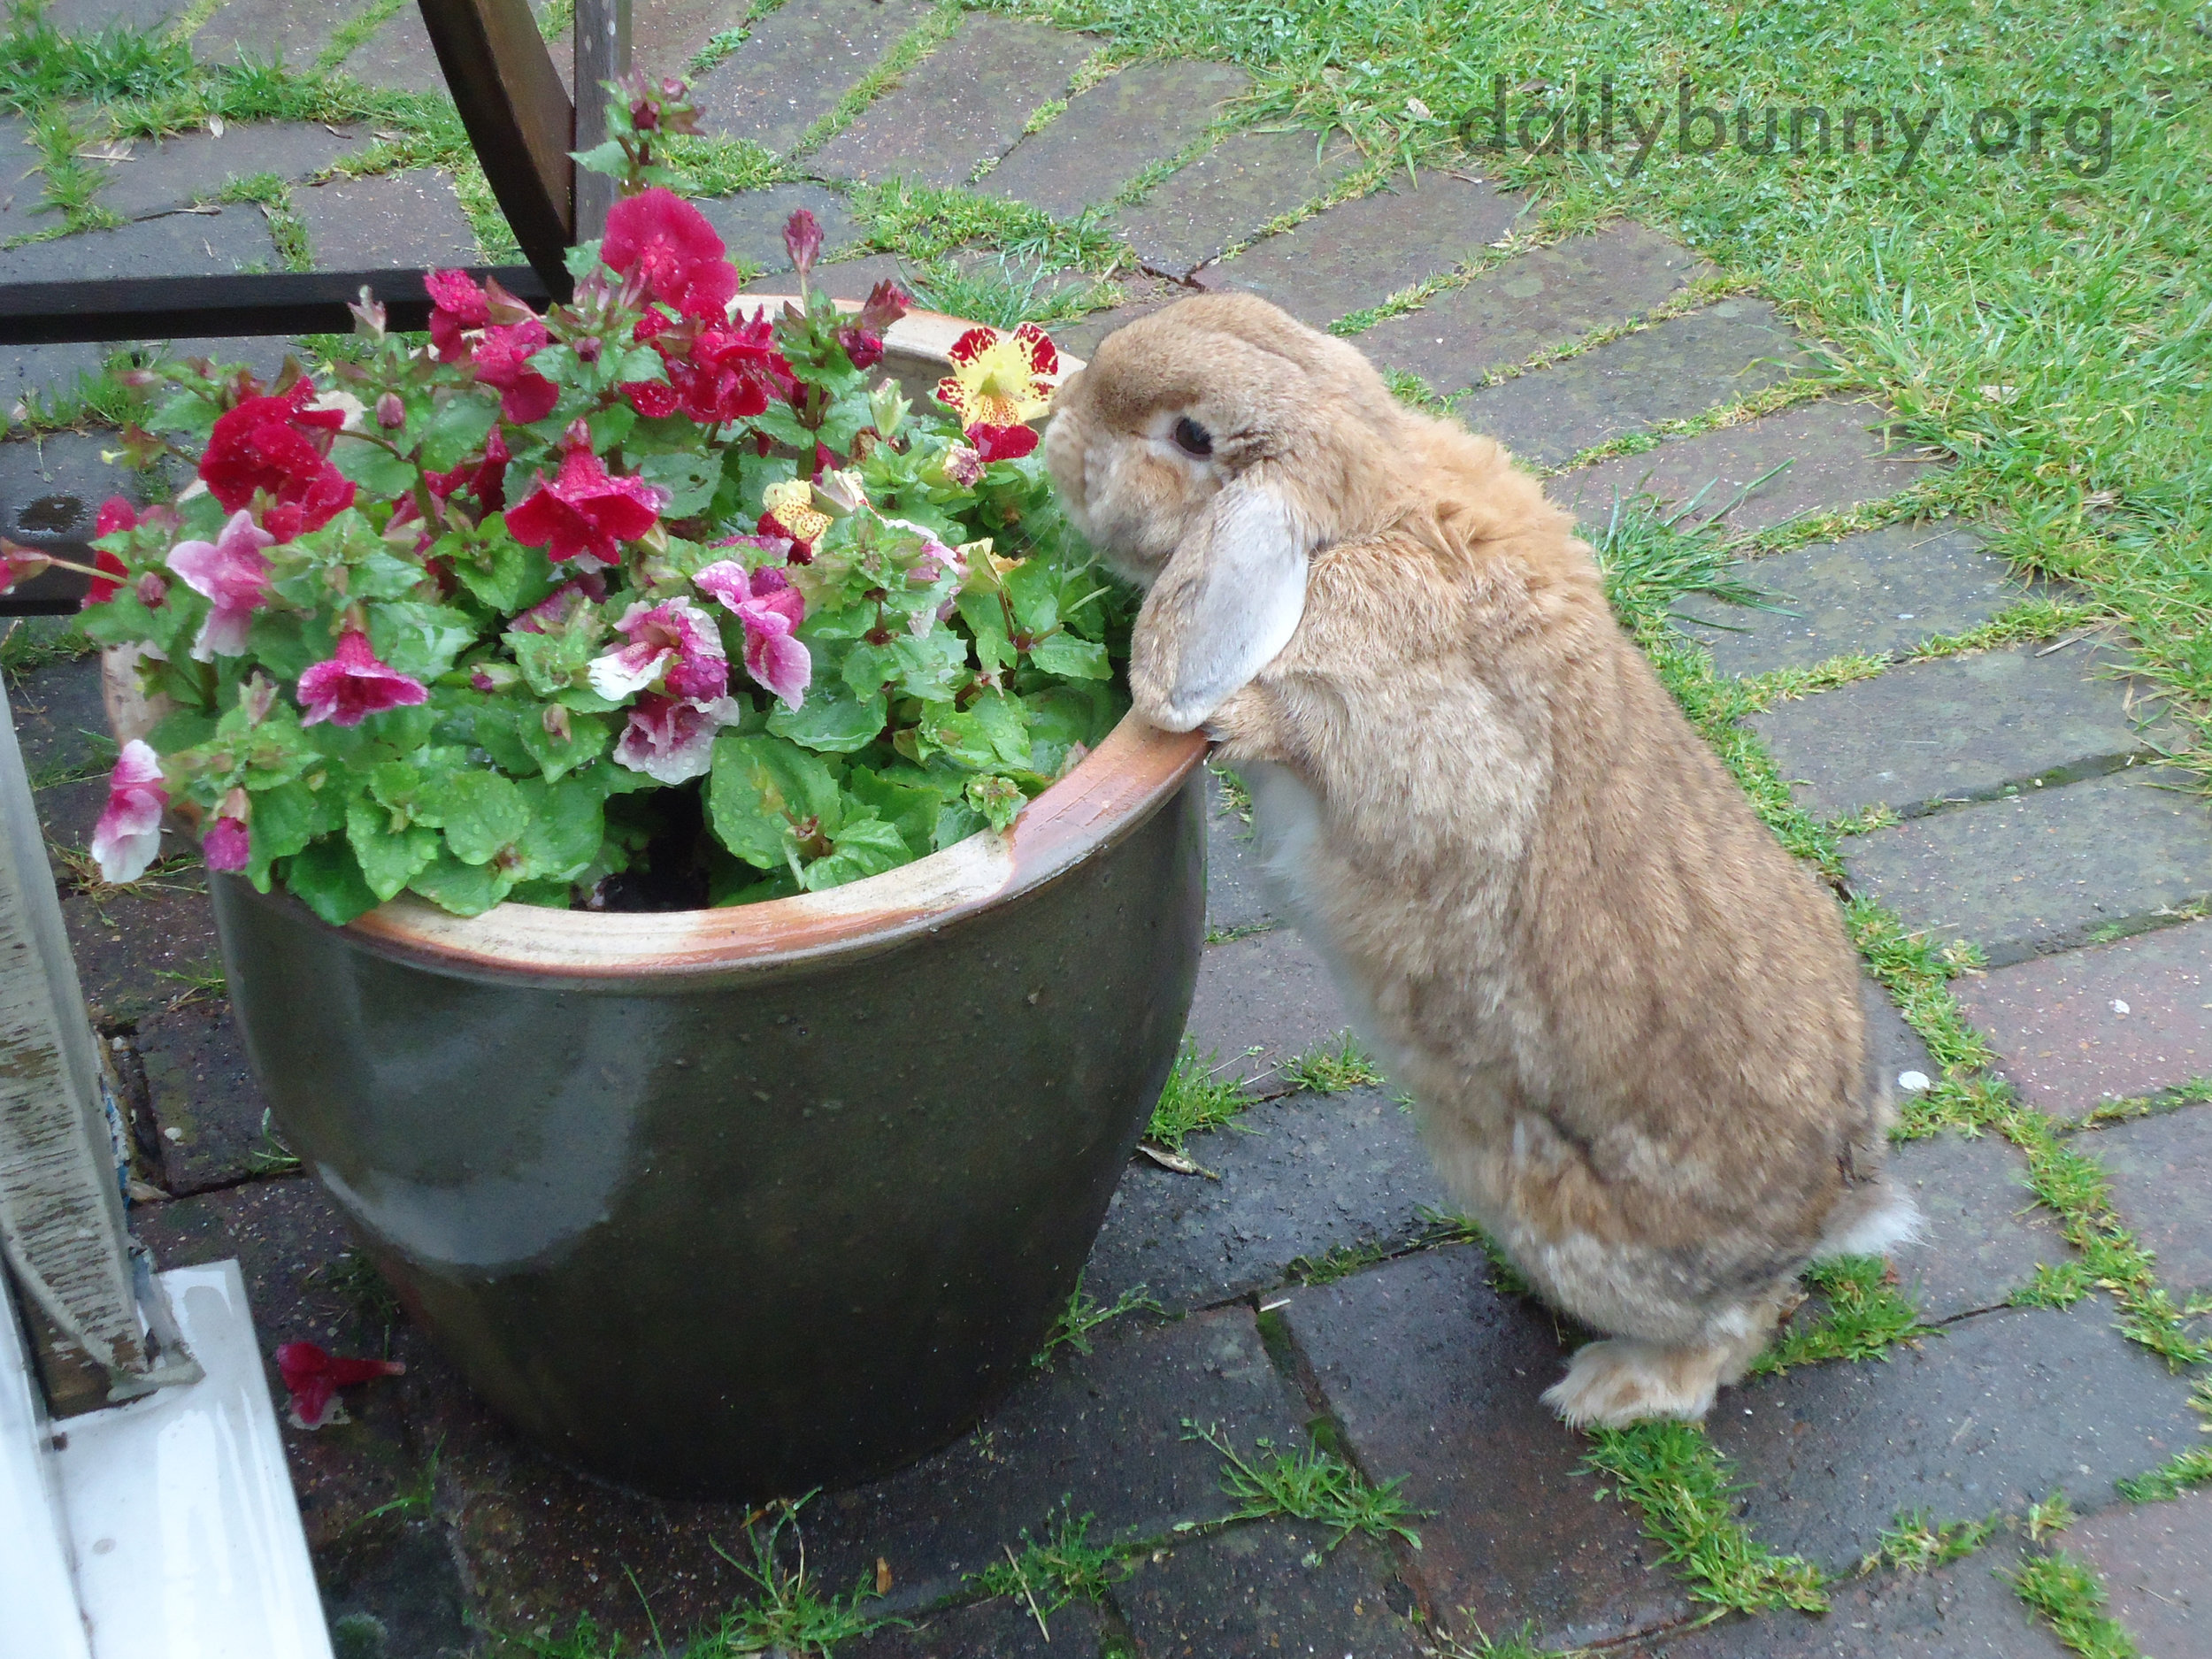 Bunny Has Found the Flowers and Will Help Herself 1